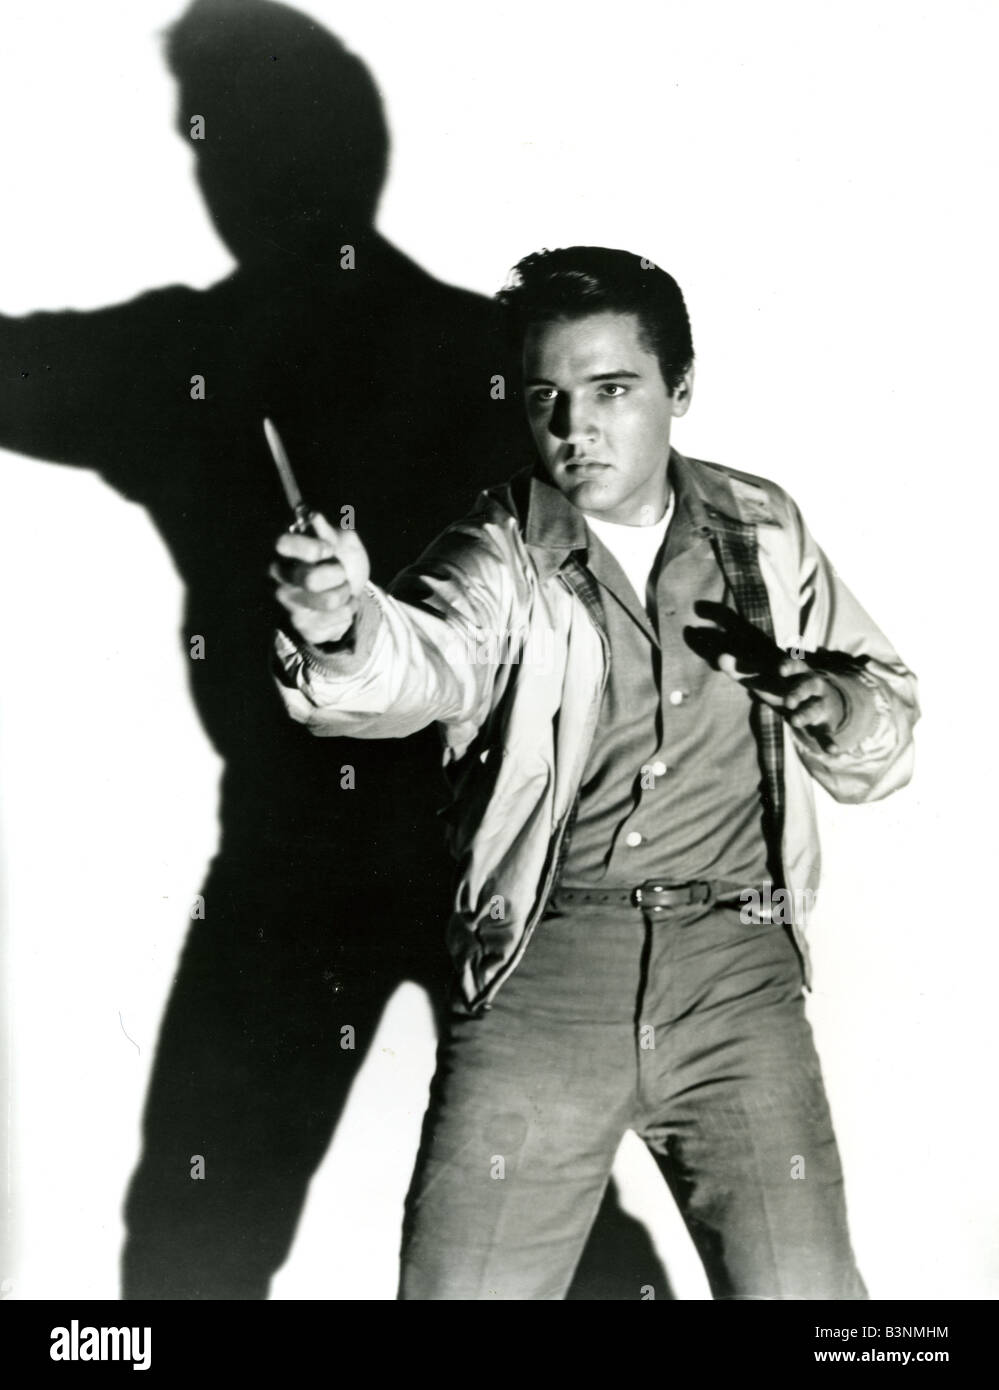 KING CREOLE   1958 Paramount film with Elvis Presley Stock Photo